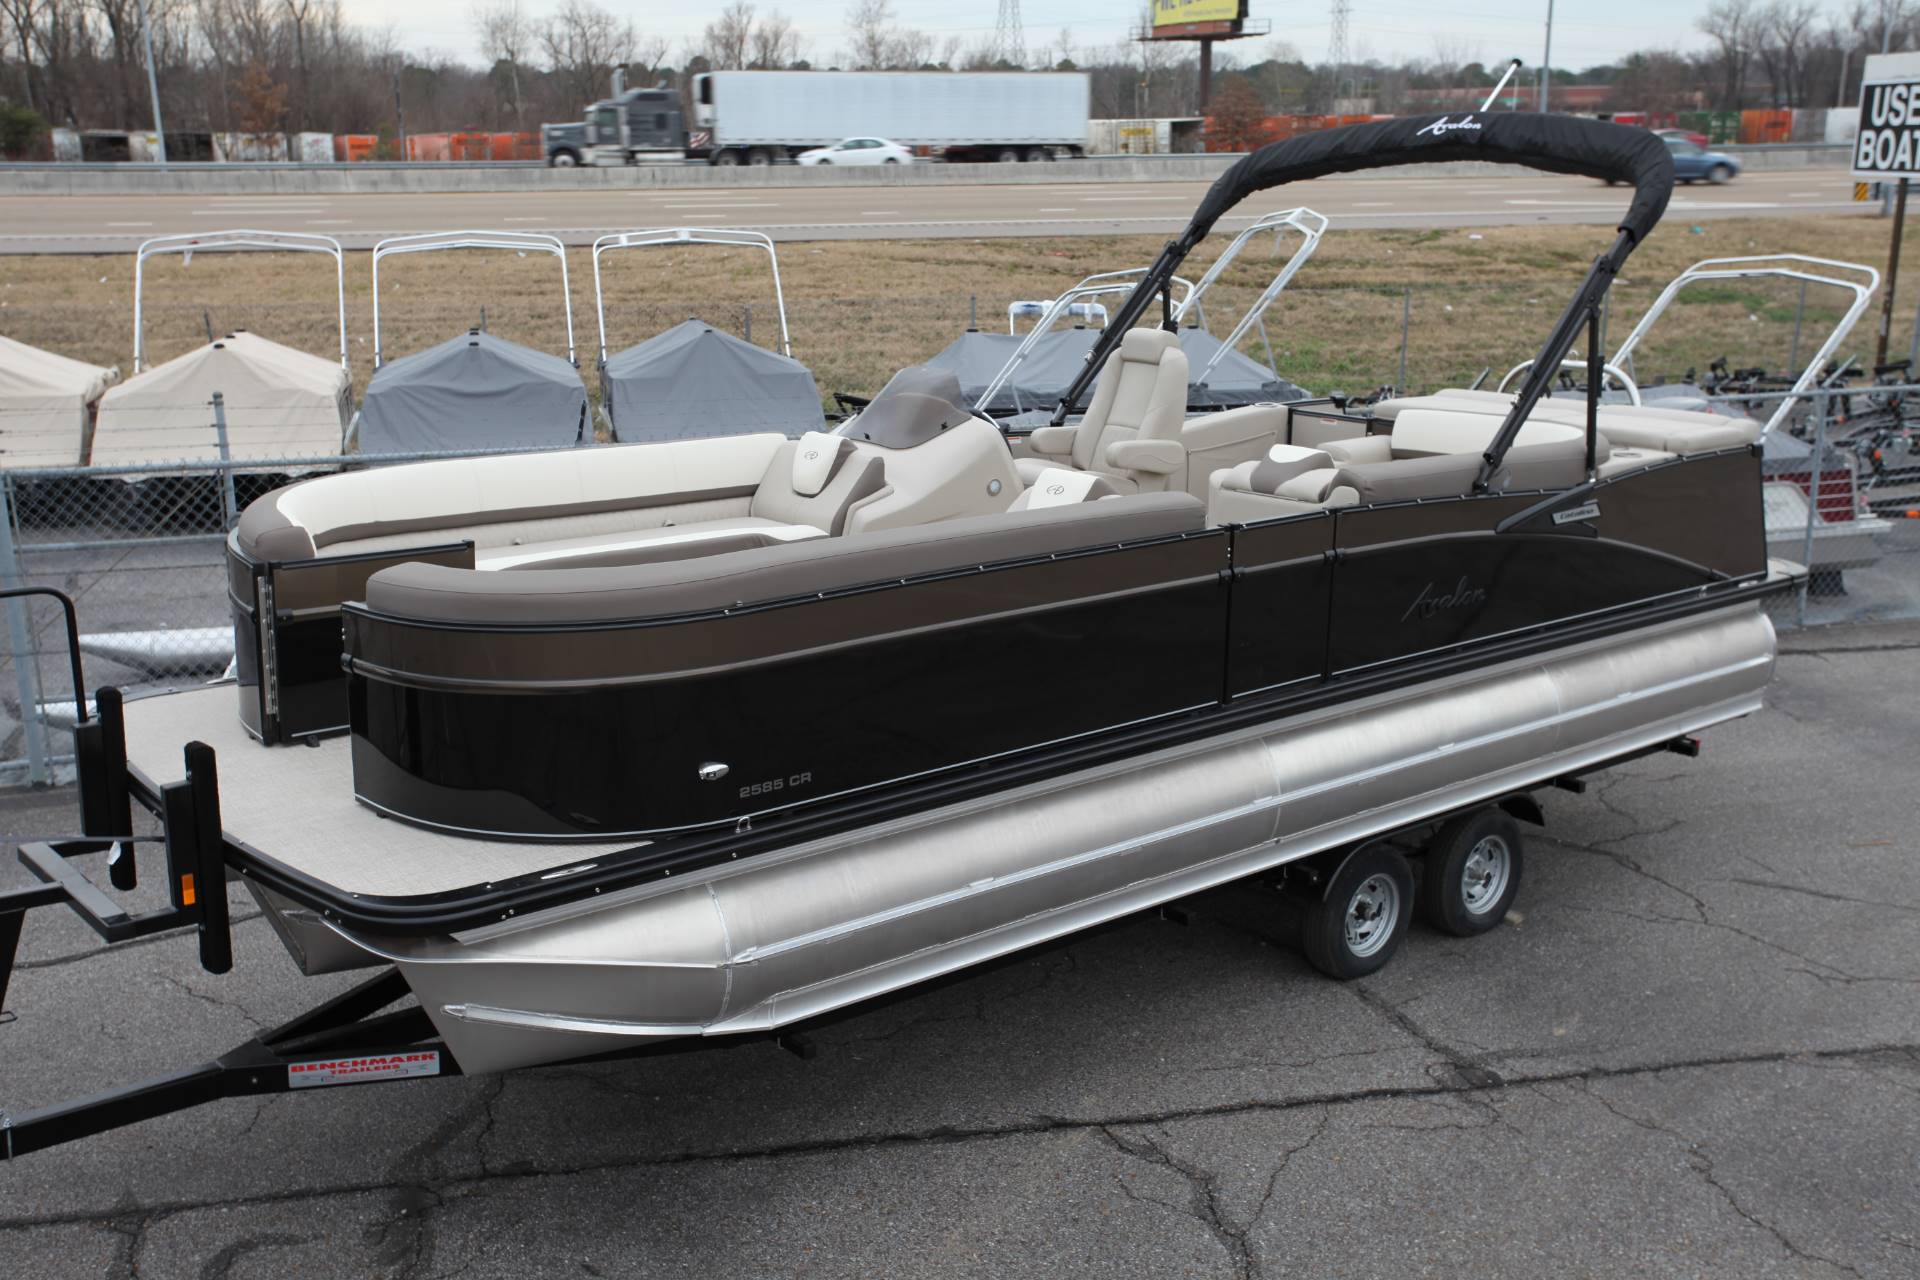 2021 Avalon Cat 2585 Cruise Memphis Tennessee Boats Com